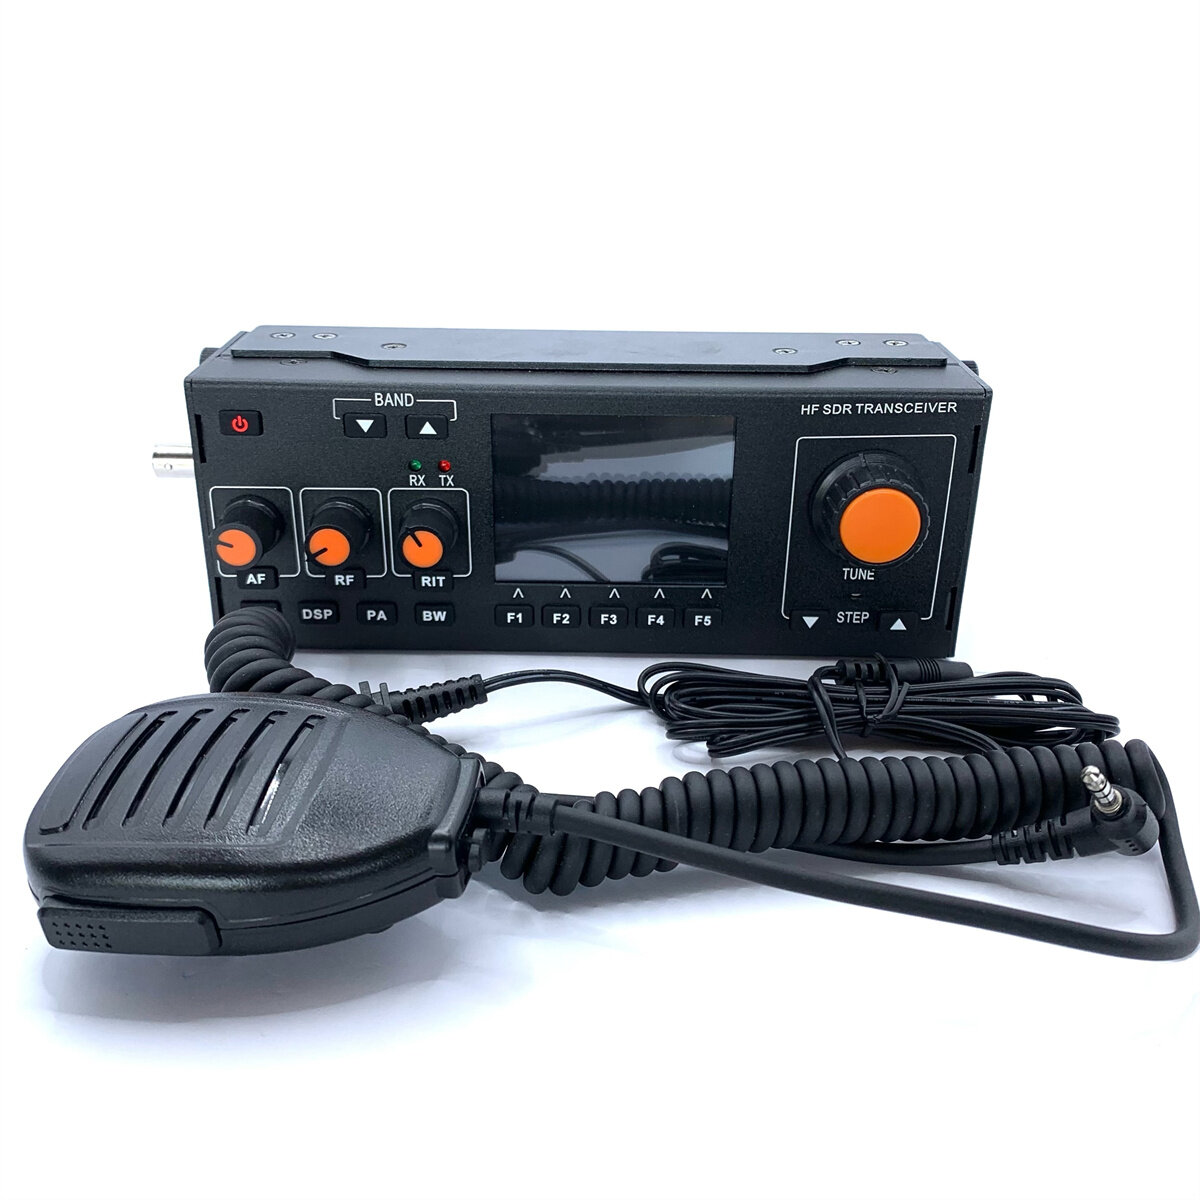 

RS-918 Plus HF SDR Transceiver MCHF-QRP Transceiver Amateur Shortwave Radio With Microphone Charger 3.4AH